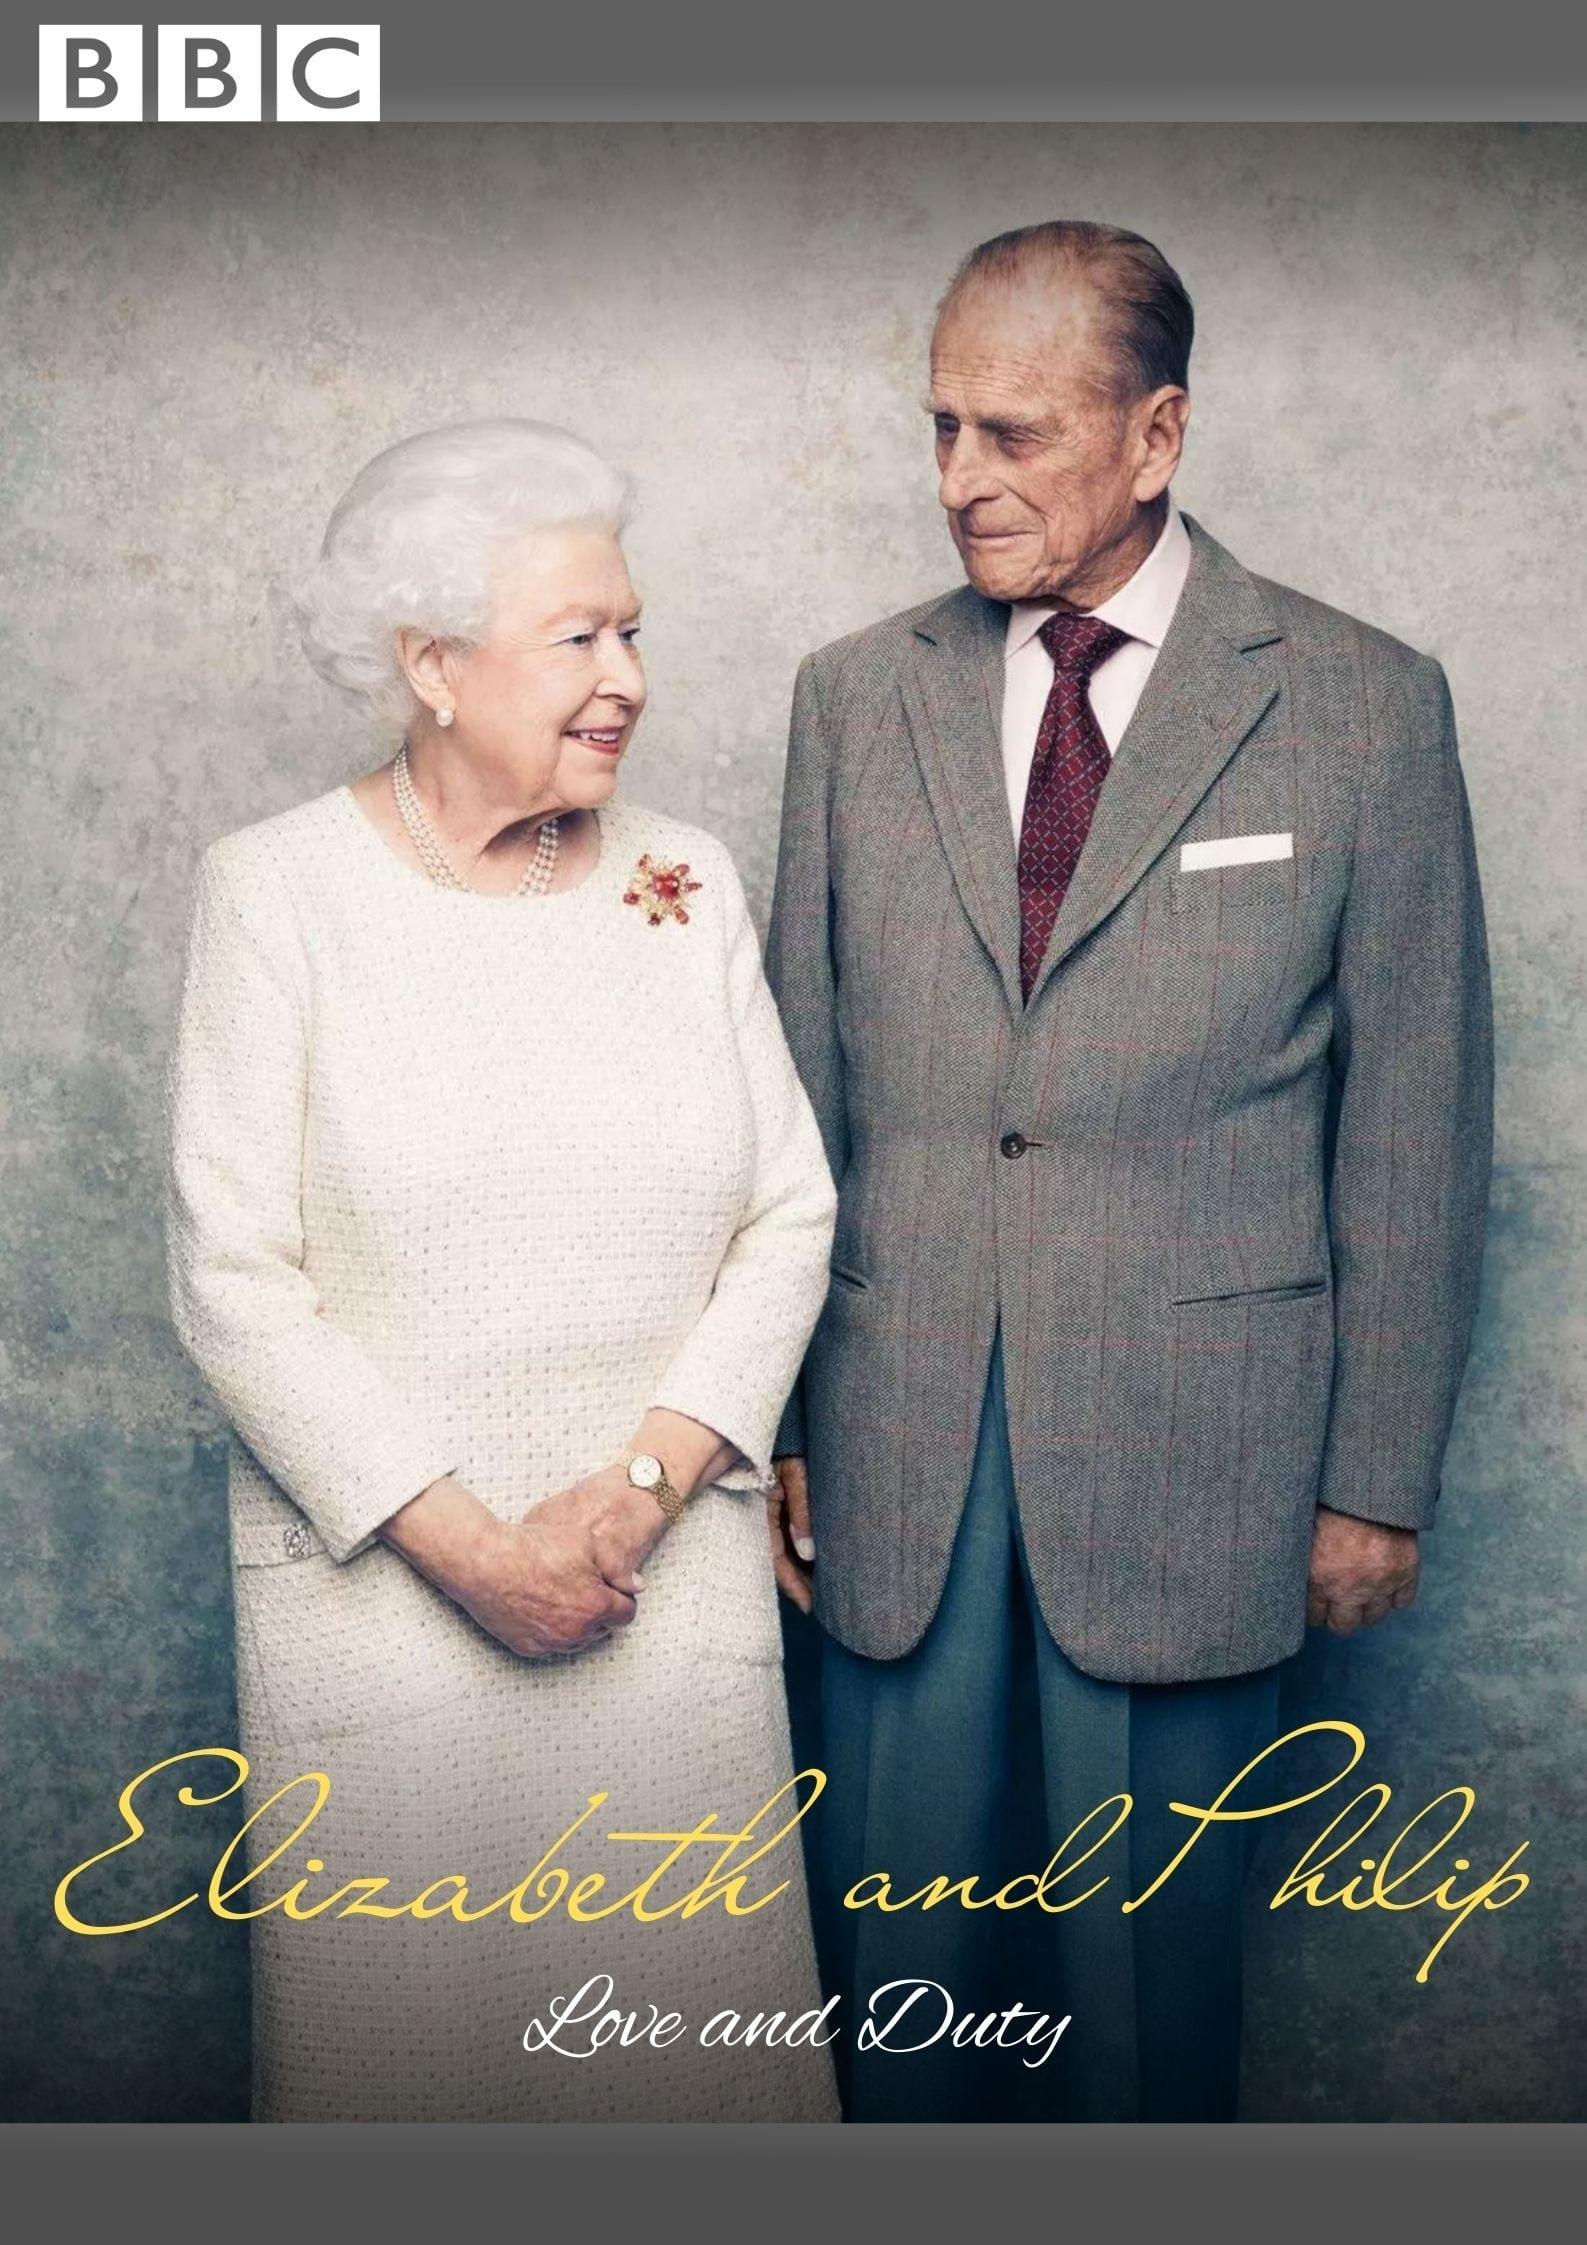 Elizabeth & Philip: Love and Duty poster